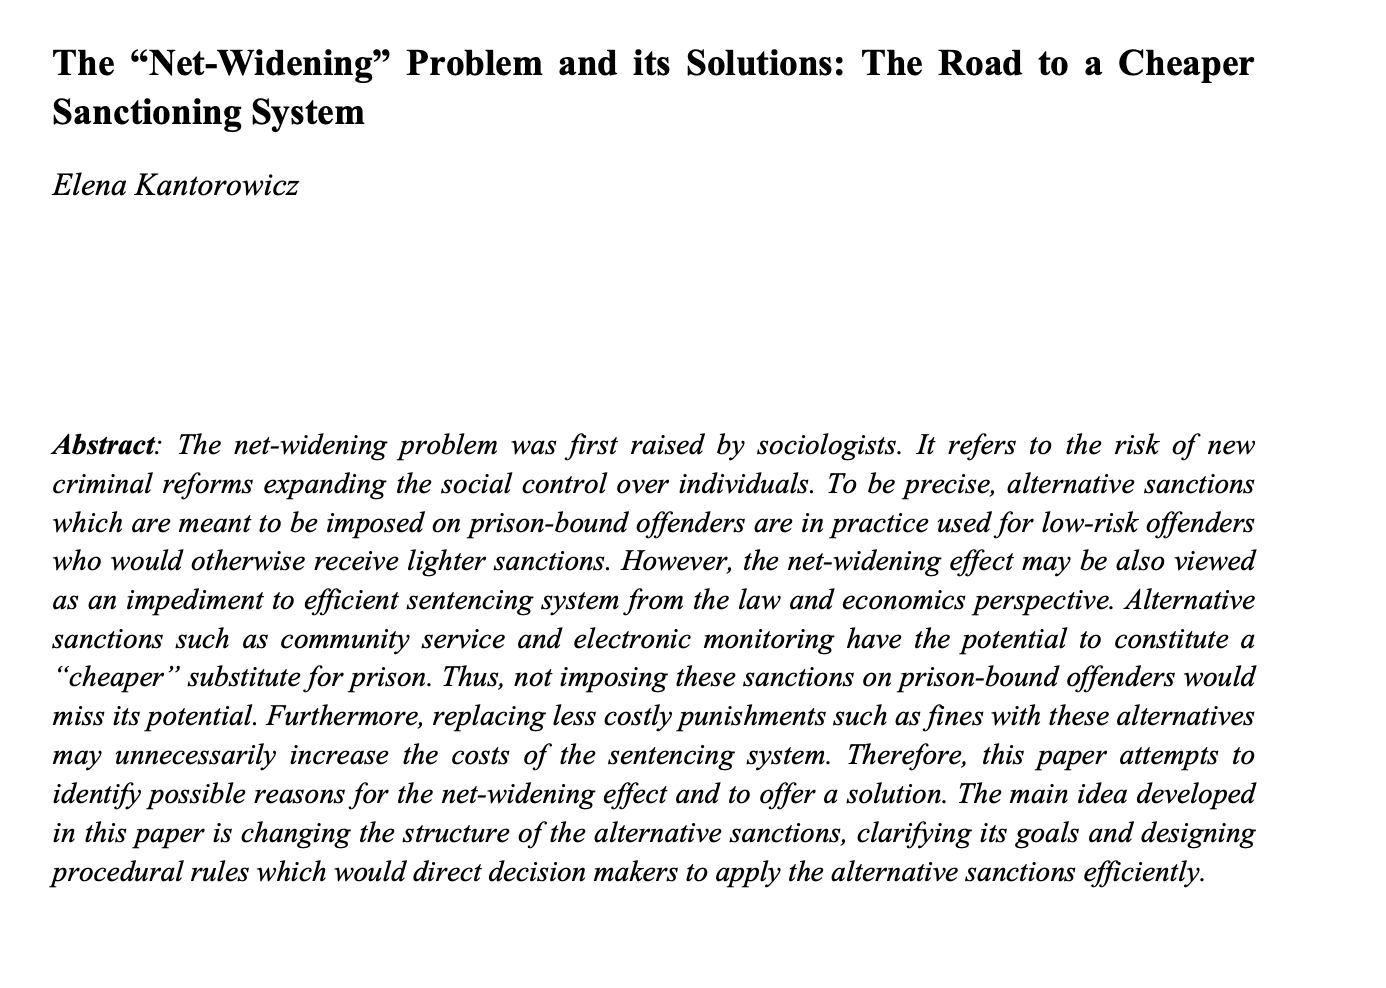 The “Net-Widening” Problem and its Solutions: The Road to a Cheaper Sanctioning System